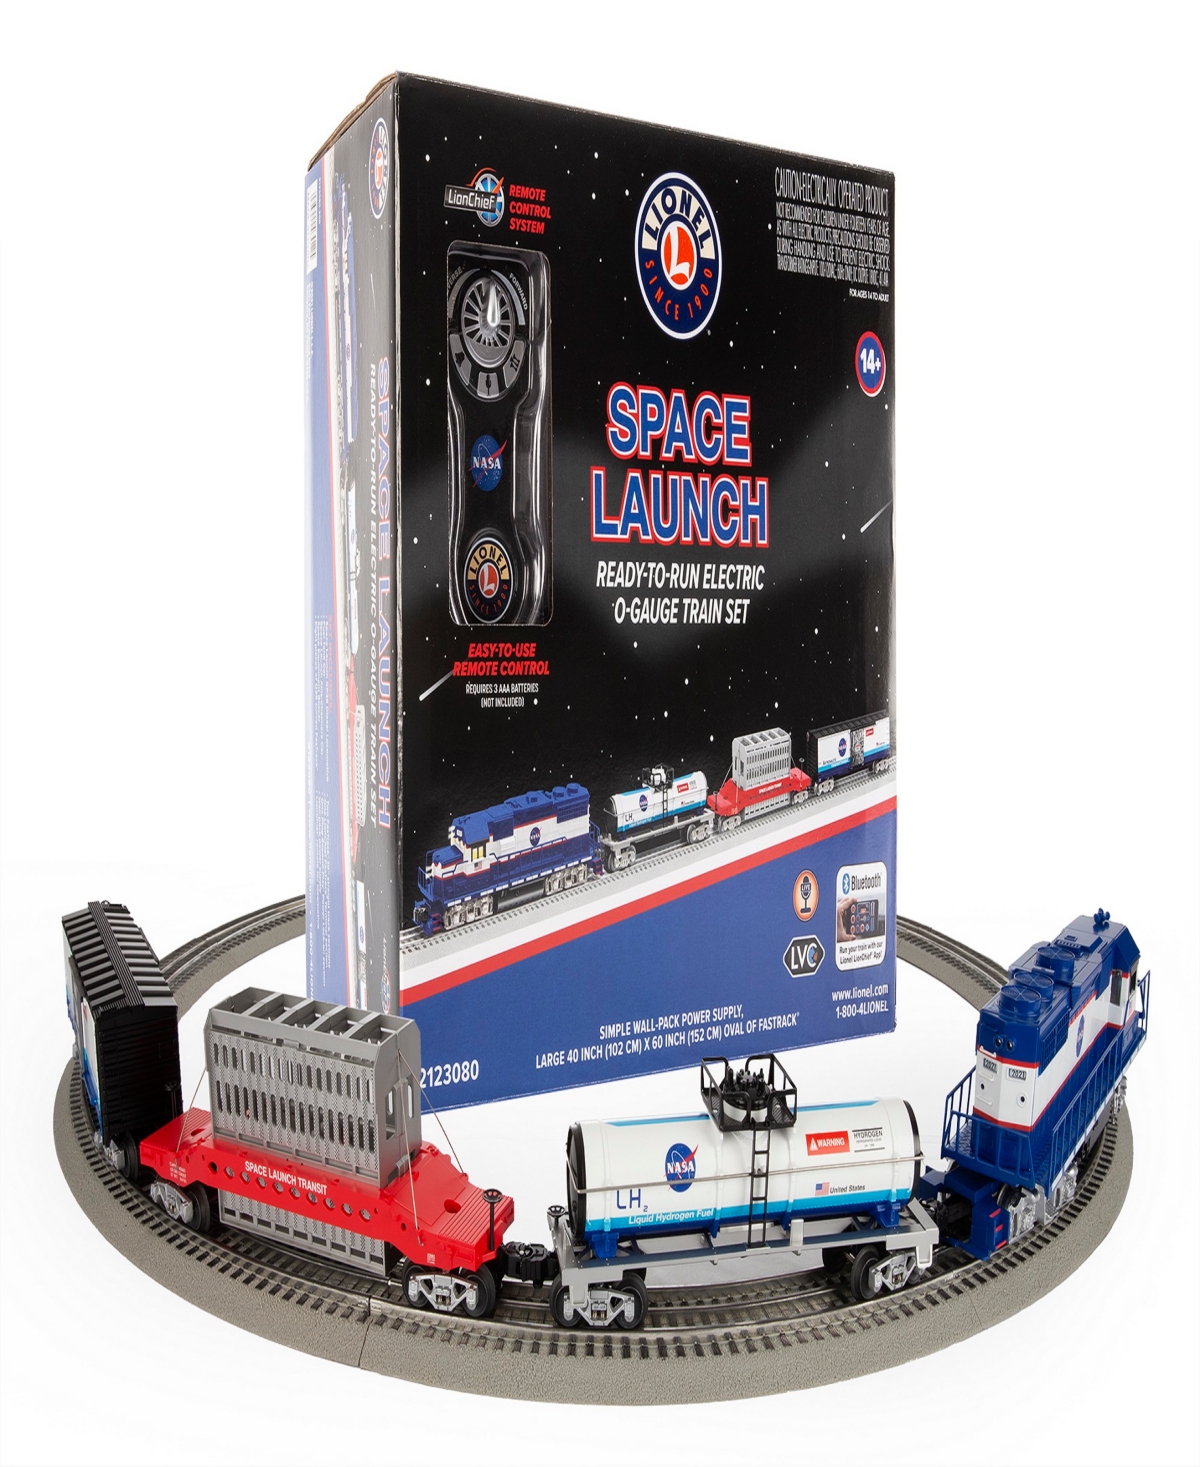 Lionel Space Launch Freight Lionchief Bluetooth 5.0 Train Set With Remote In Multi